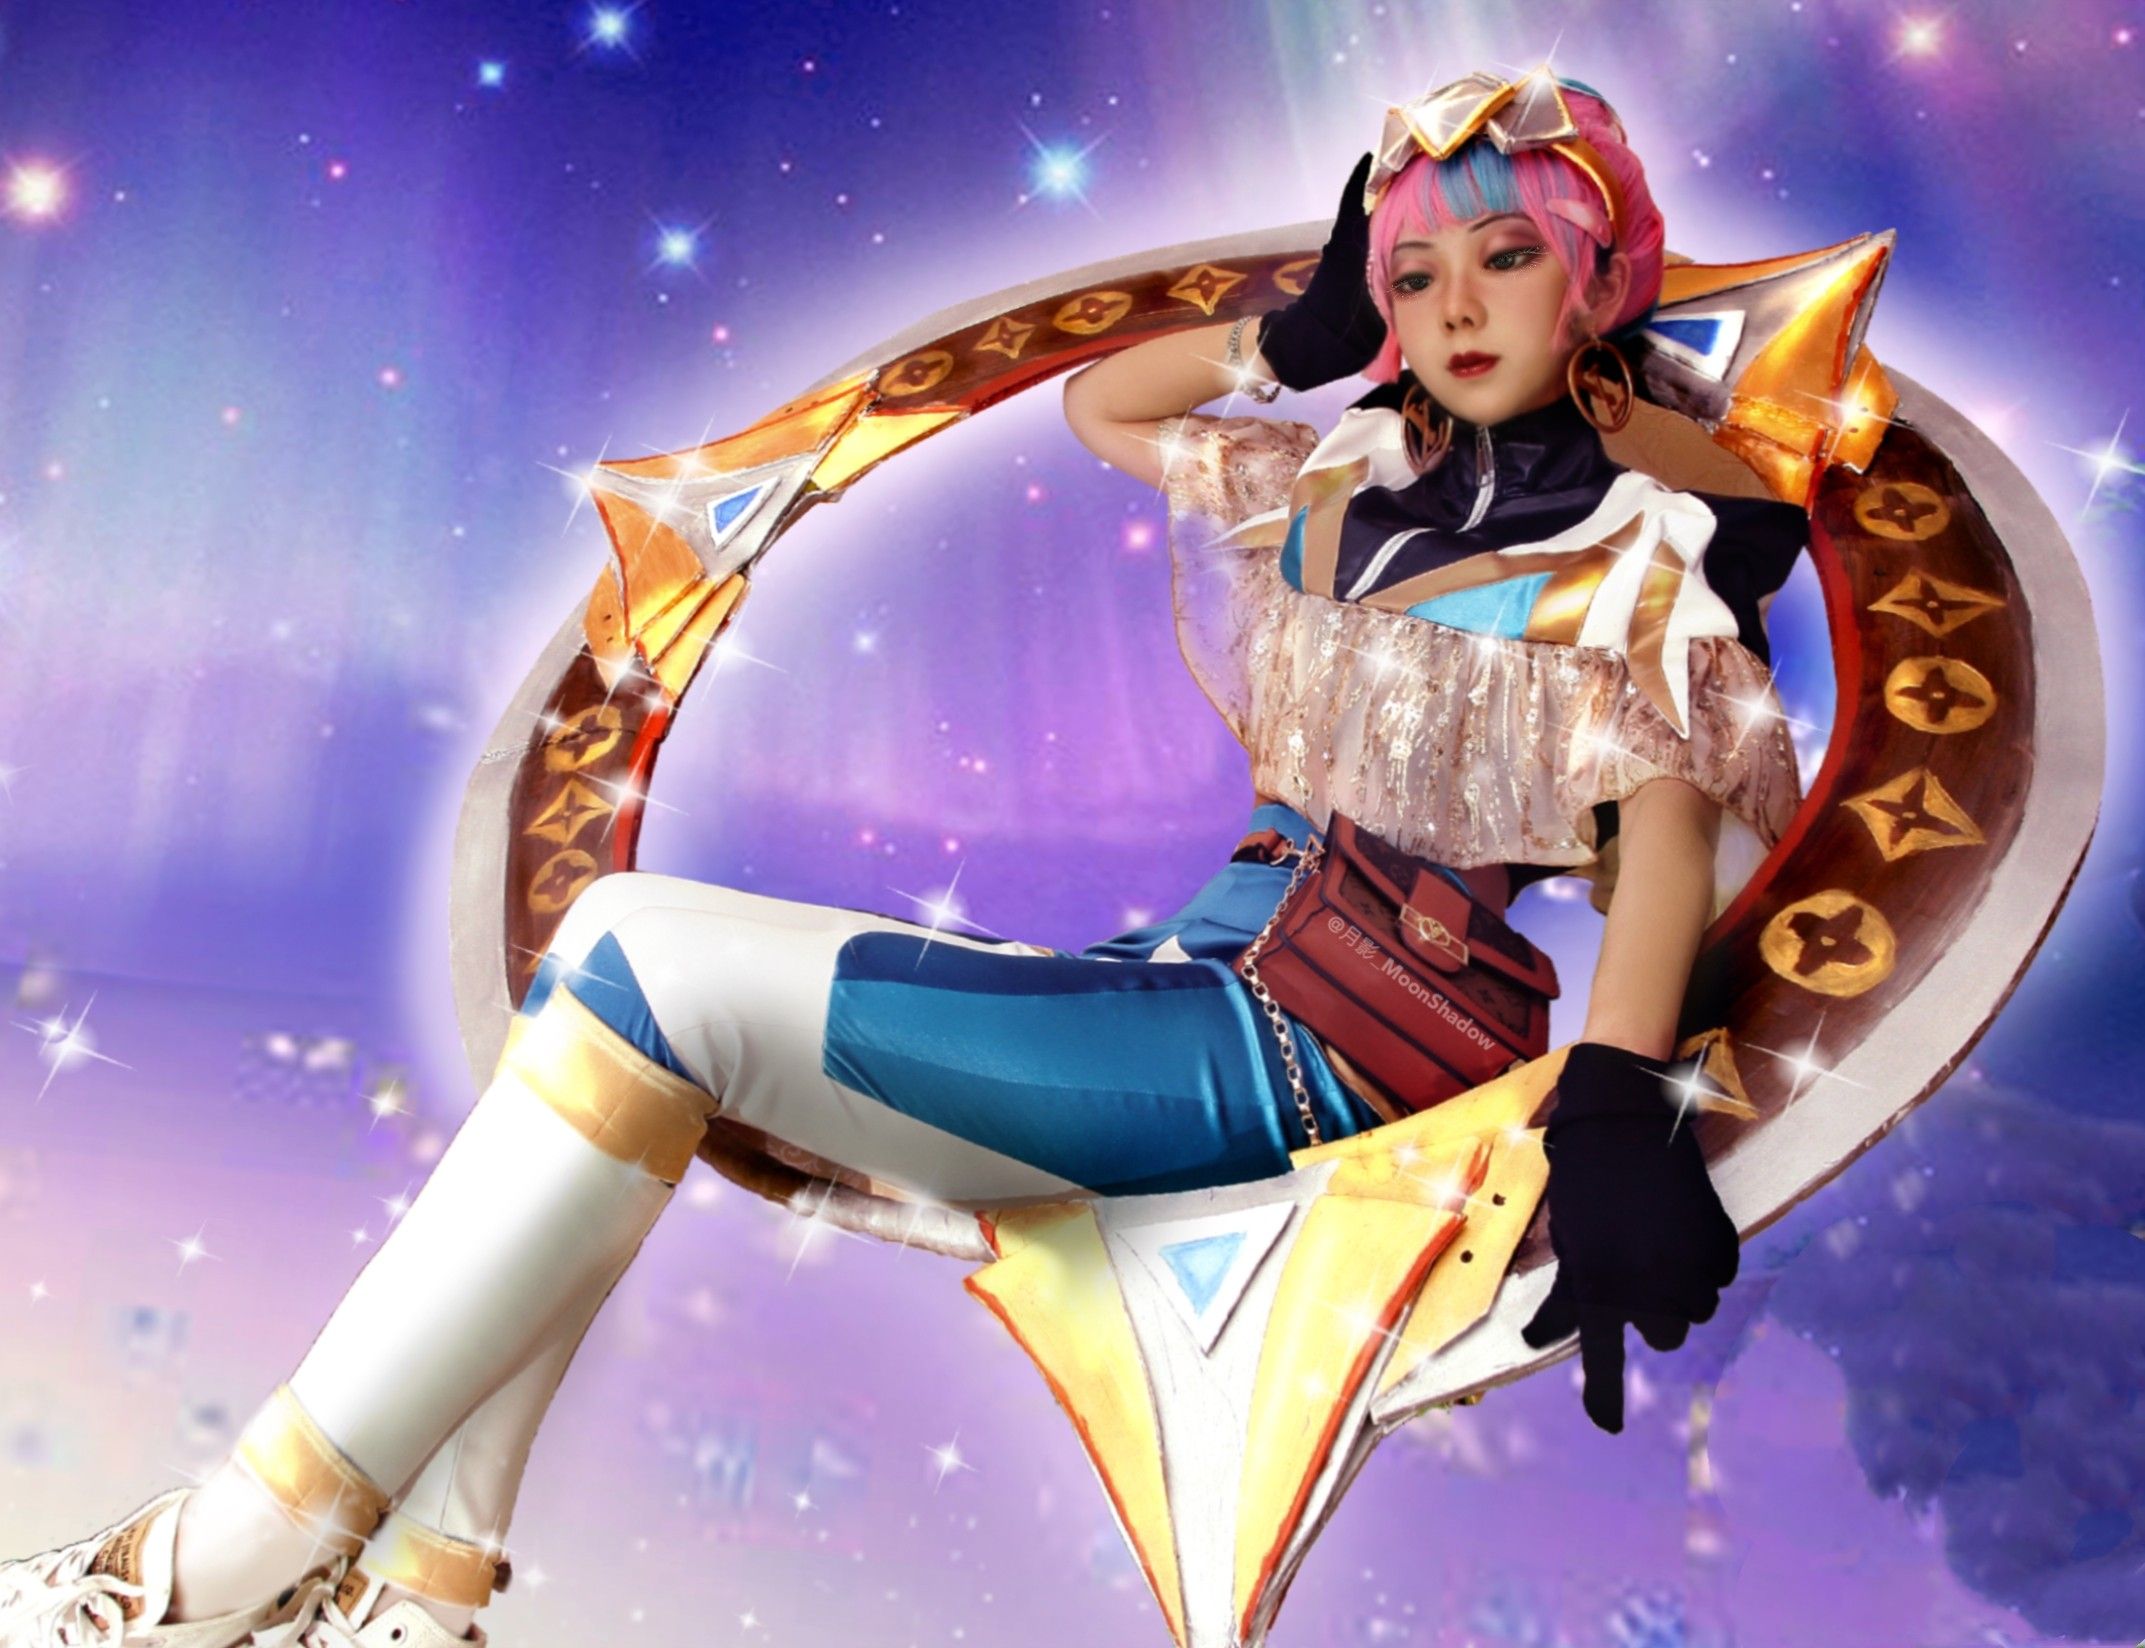 LOL True Damage Band Skin ADC Qiyana Cosplay Costume Sexy women Outfit Full  Sets A - AliExpress